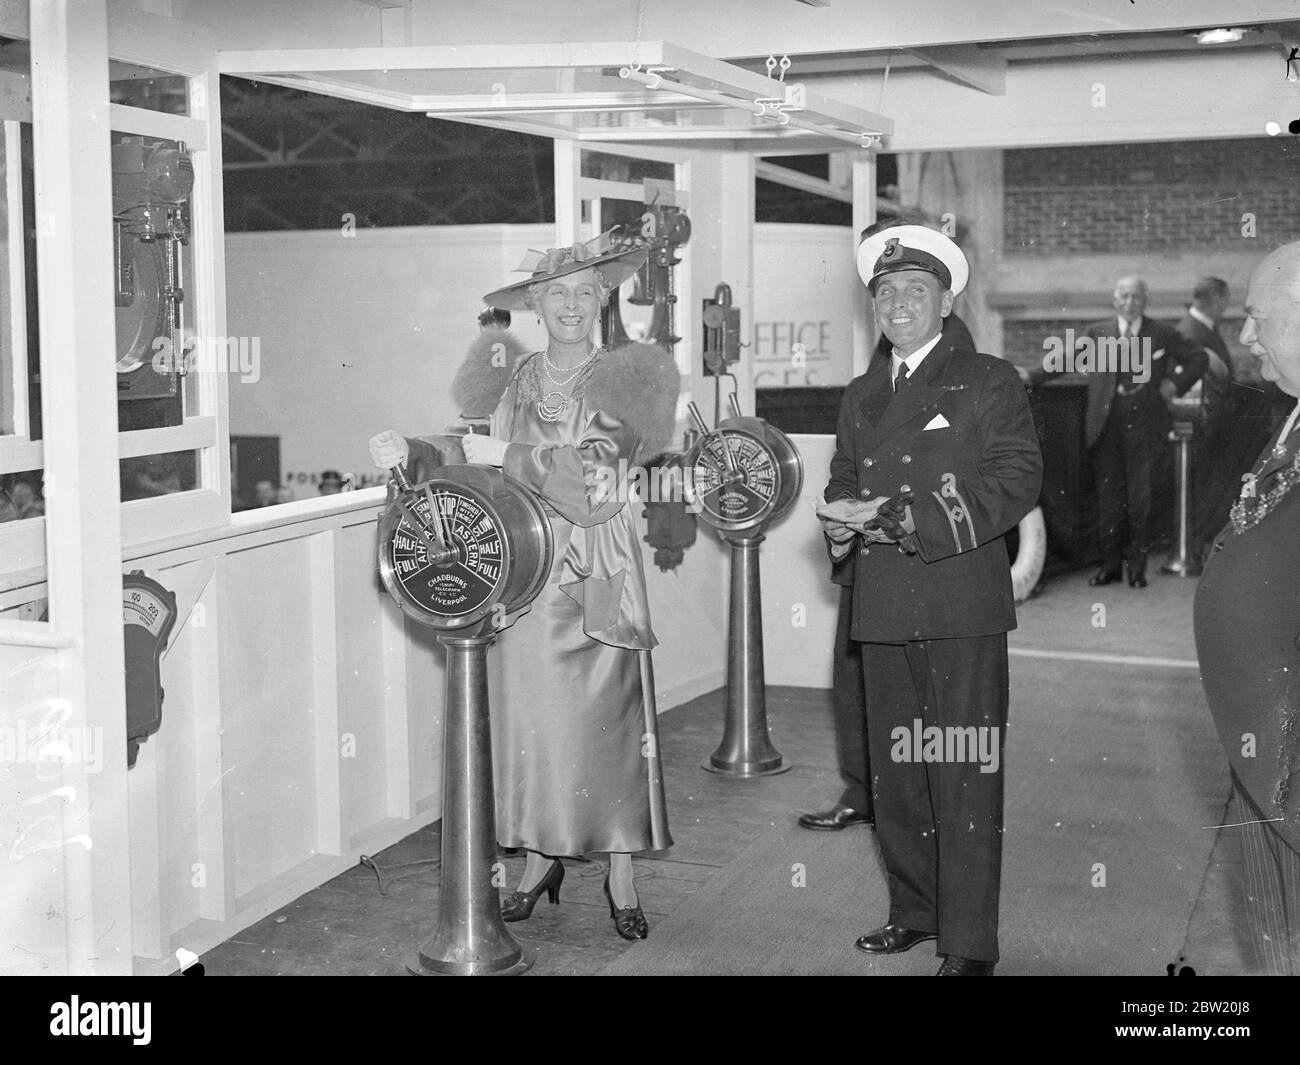 Britain's first Merchant Navy Week was opened at Southampton by Princess Alice Countess of Athlone, who signalled full speed ahead on a ship's telegraph. 17 July 1937 Stock Photo